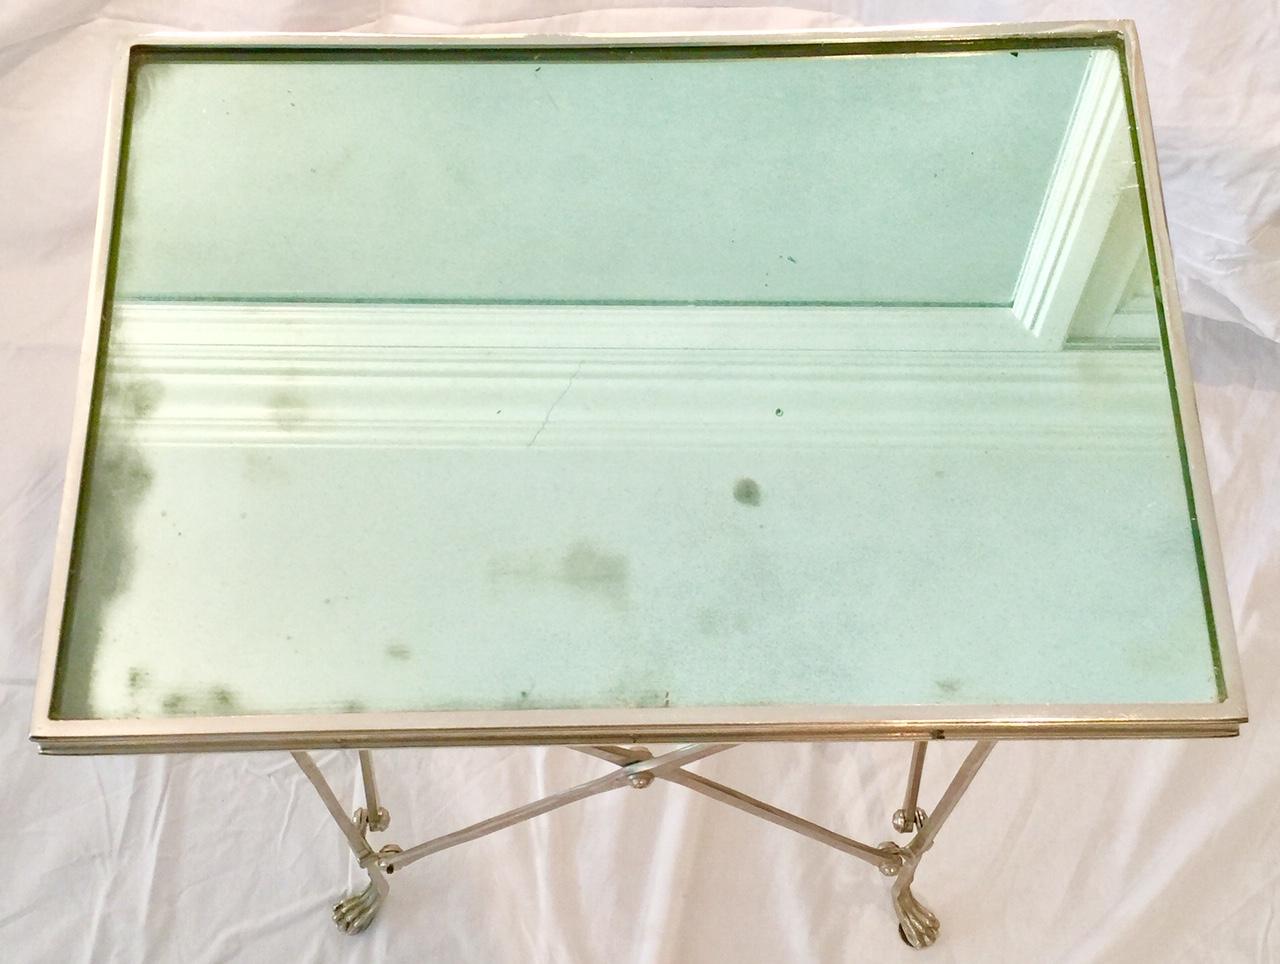 Neoclassical Empire Style Rectangular Gueridon Table, Nickeled with Mirror Top For Sale 6